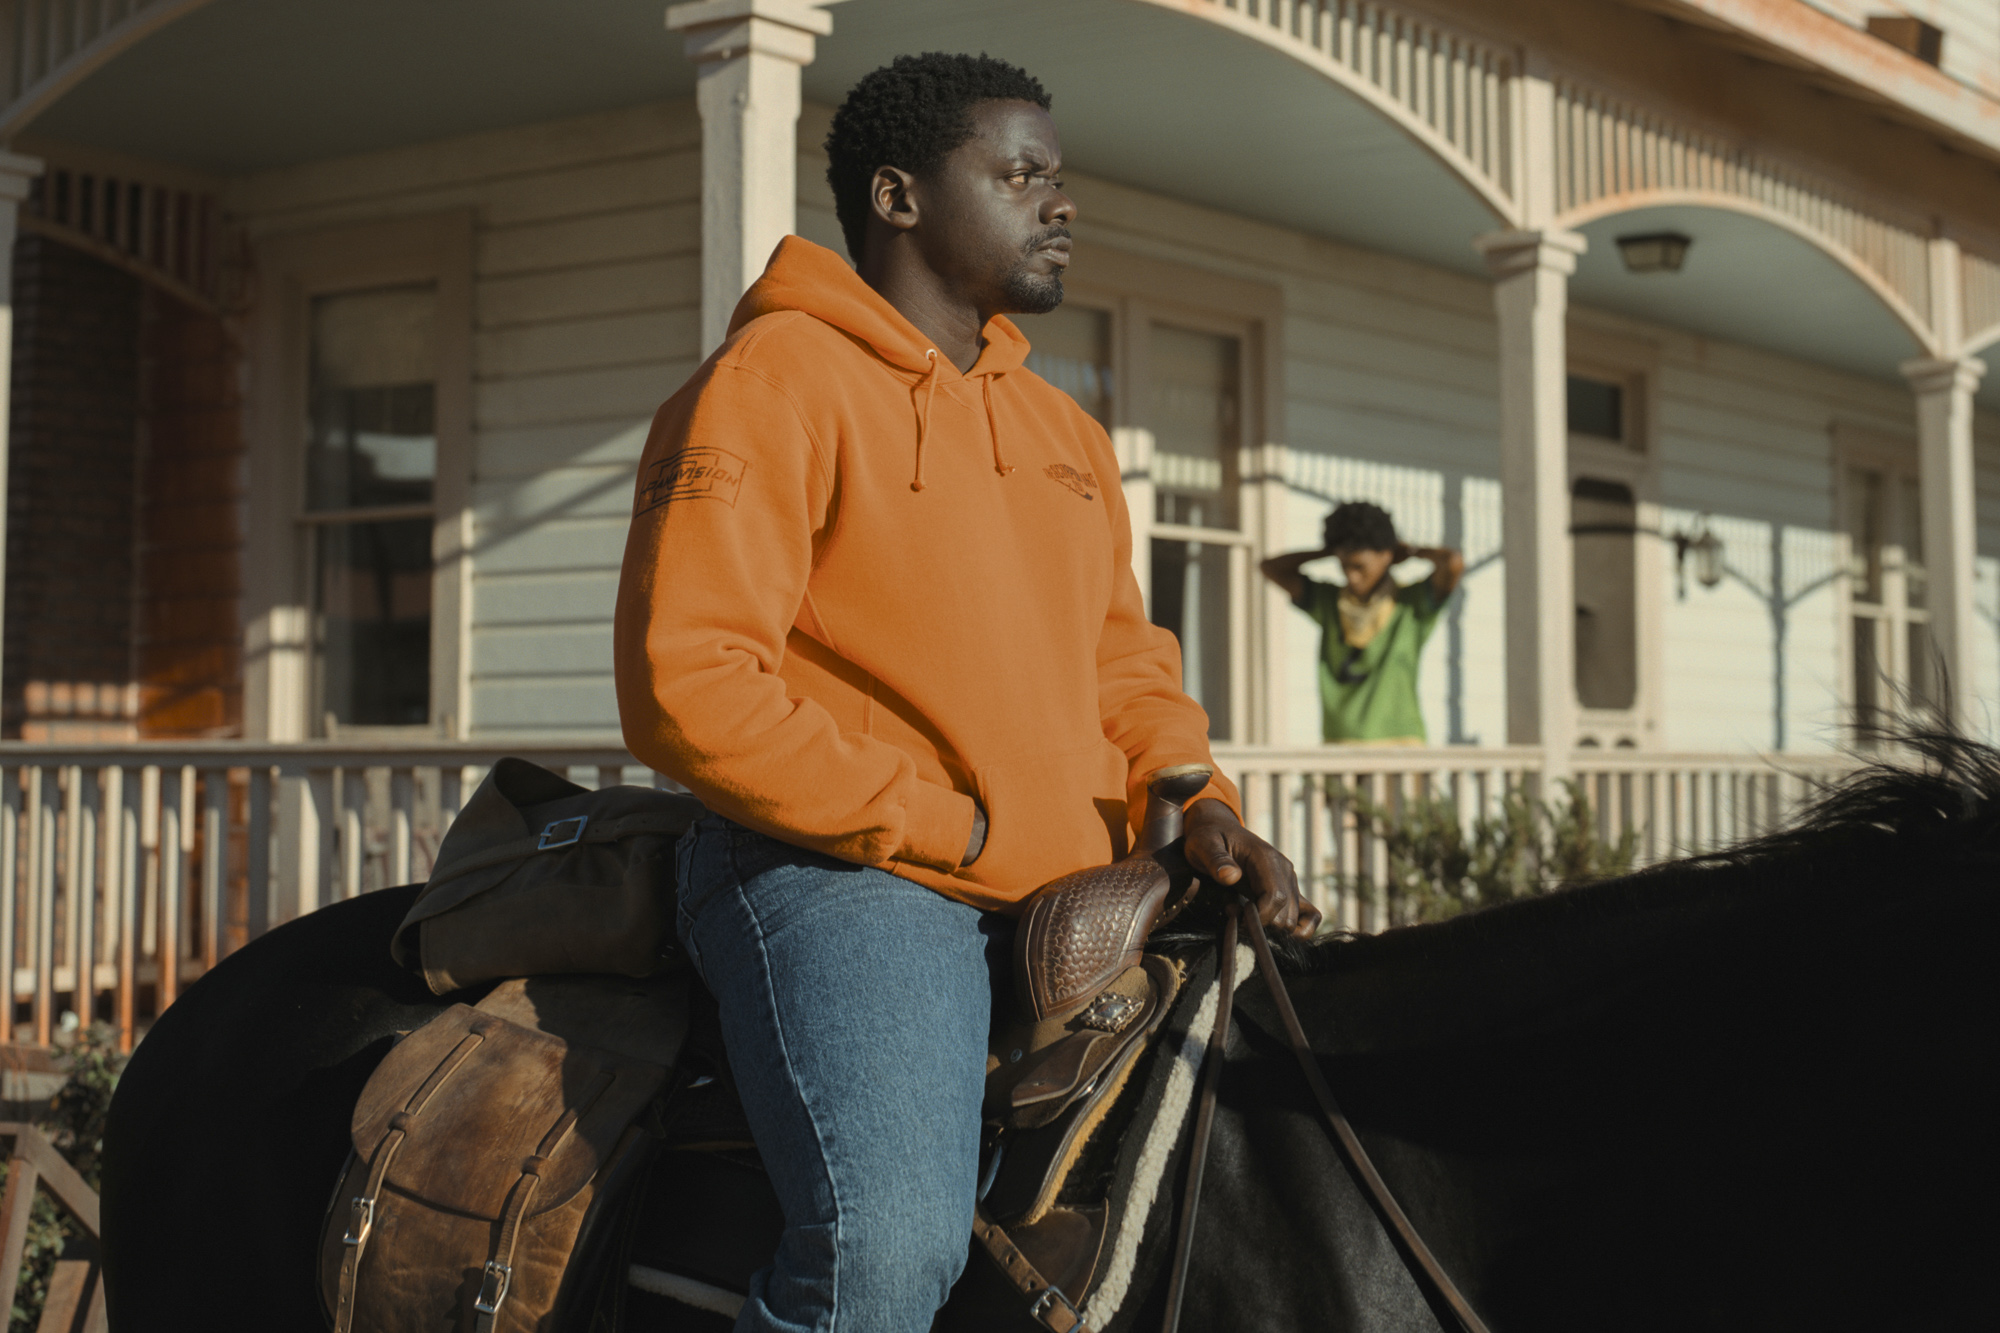 Daniel Kaluuya as OJ Haywood rides on the back of a horse while Keke Palmer as Em Haywood stands behind on the porch of a house.